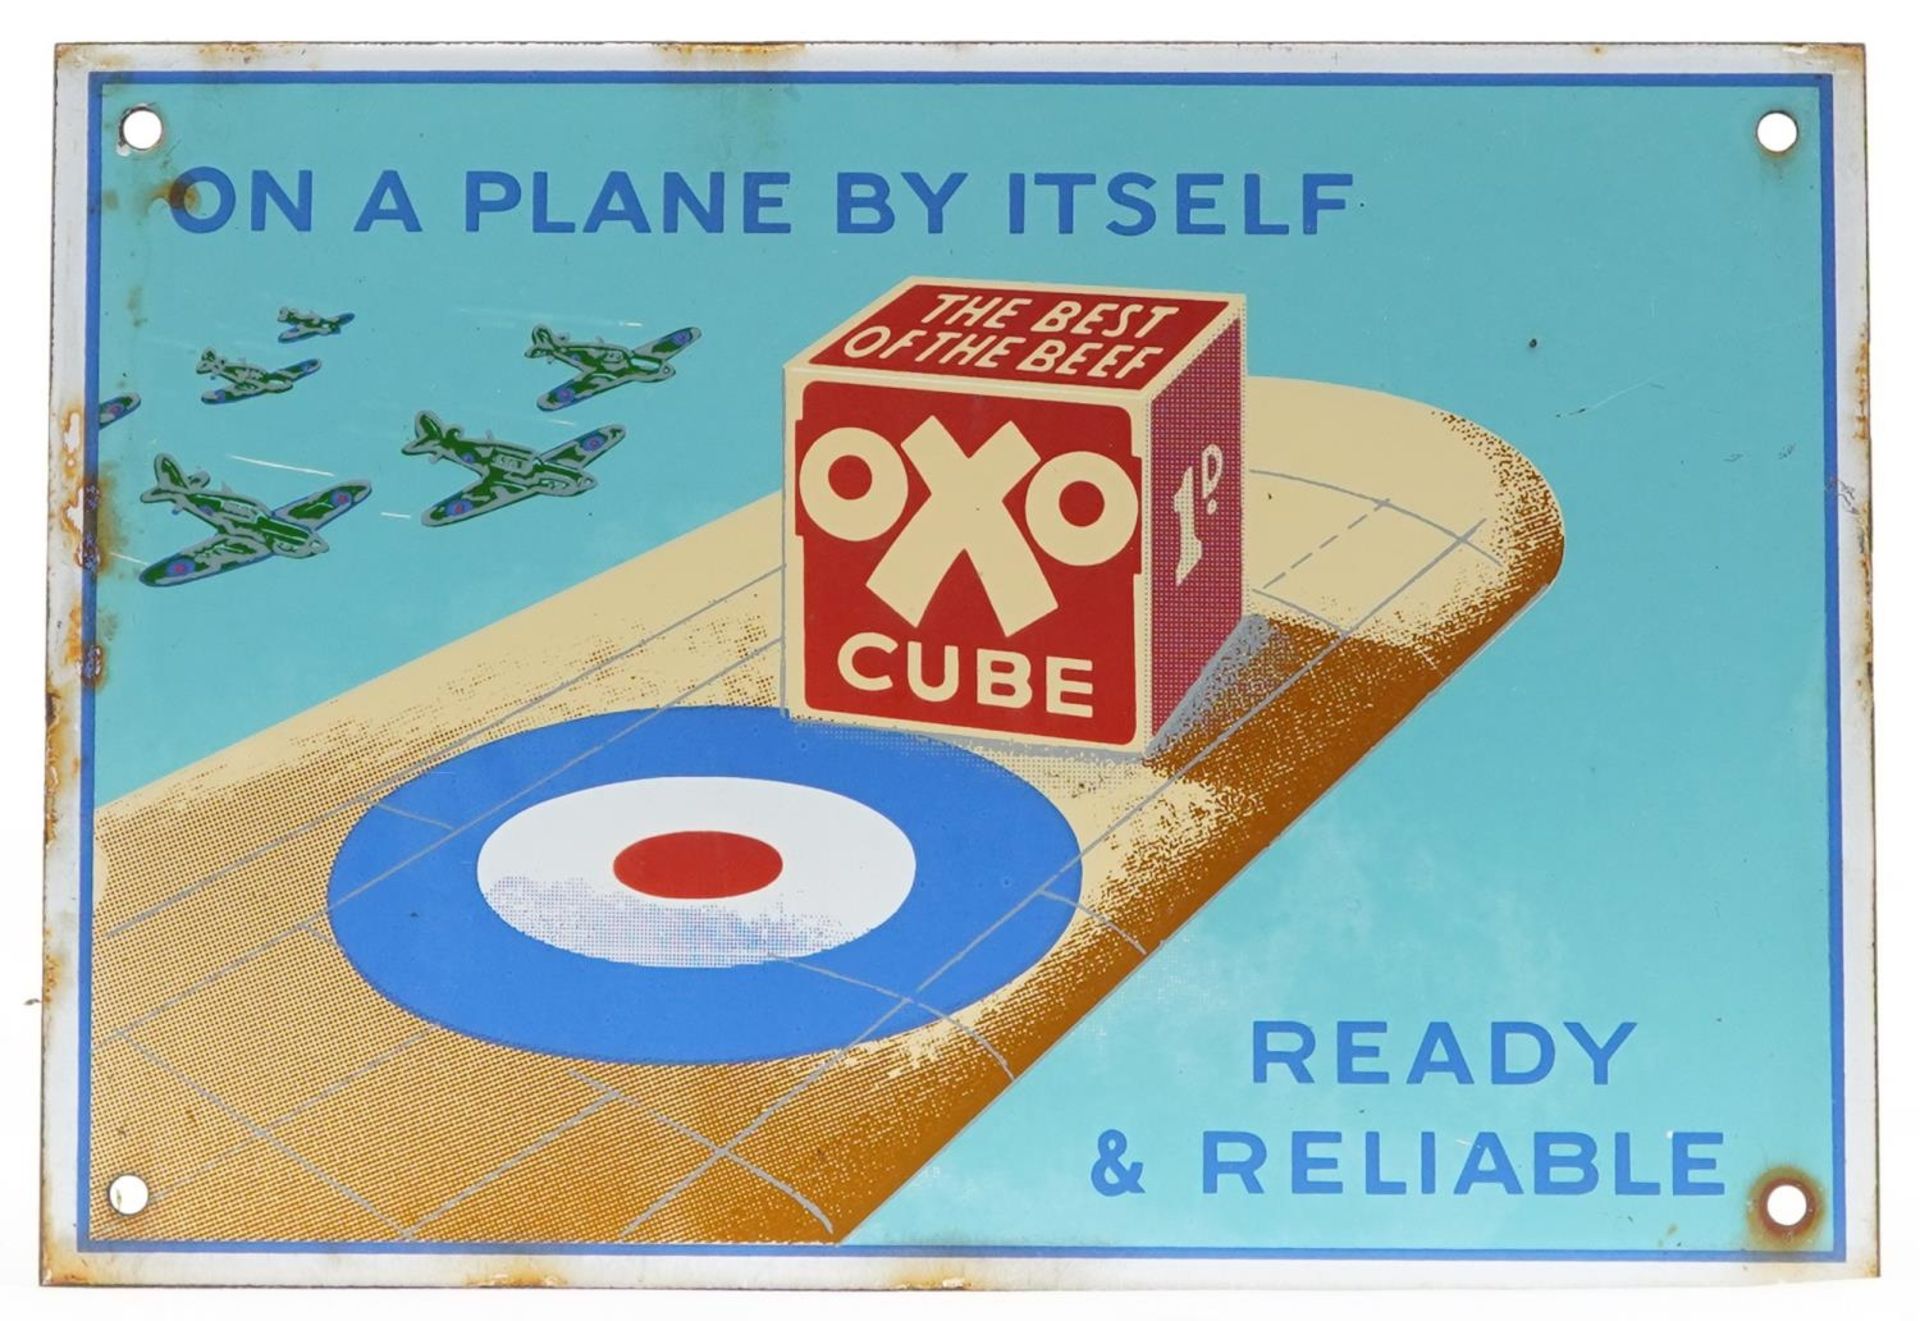 Military interest Oxo Cube propaganda enamel advertising sign inscribed On a Plane by Itself,